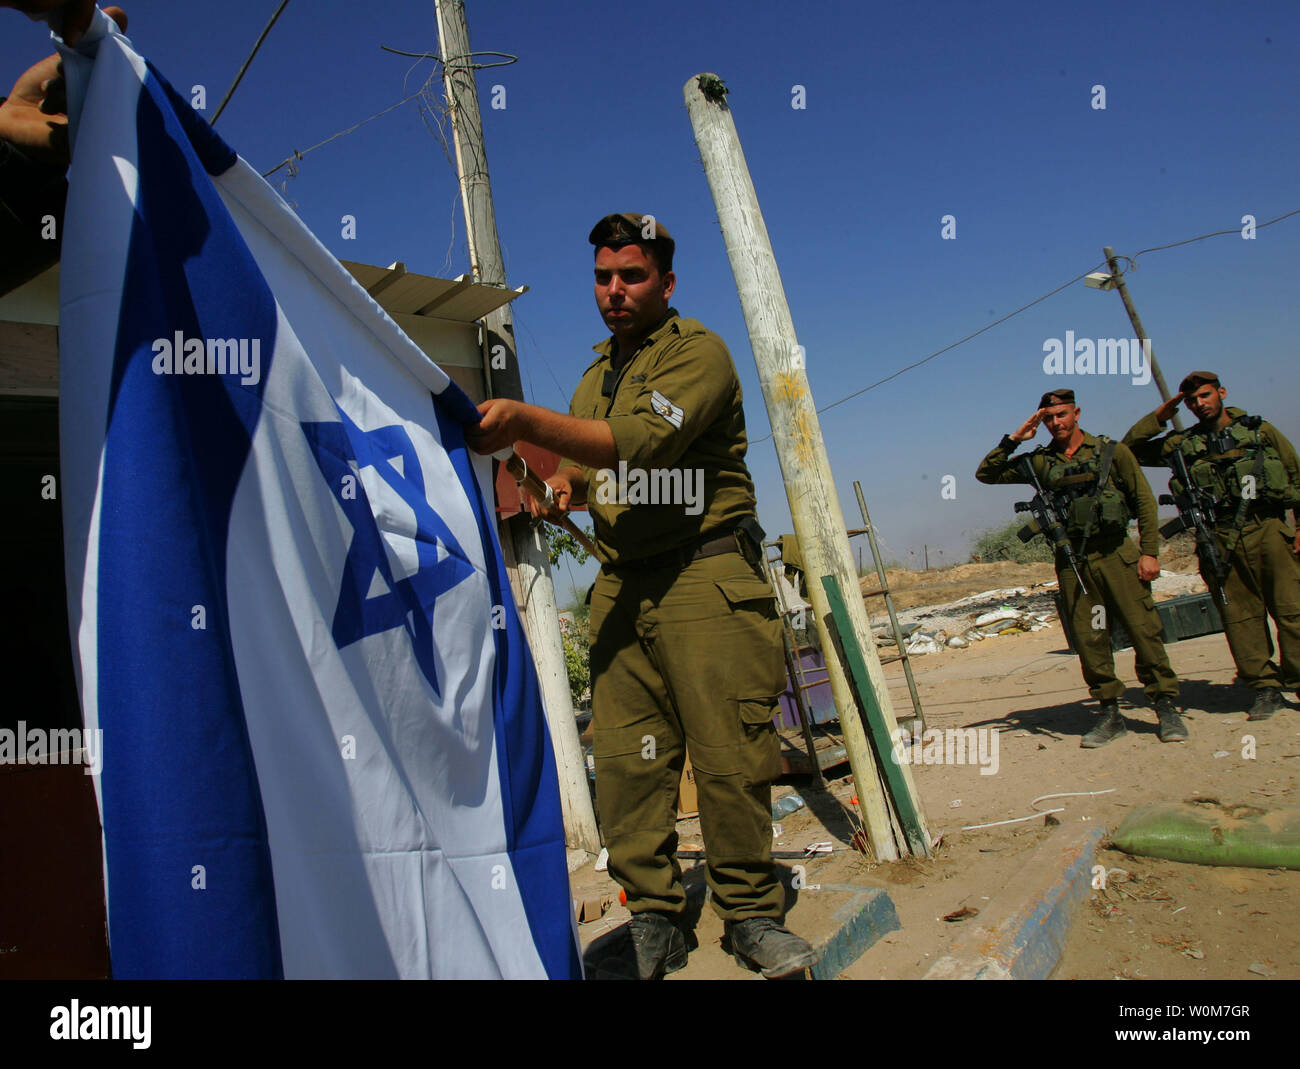 Army officers salute as Israeli soldiers from the Golani brigade lower the flag as they prepare to withdraw September 11, 2005 from the Yareach outpost in the southern Gaza Strip. Israel is expected to withdraw the last of their troops from the Gaza Strip within hours bringing an historical end to 38 years of occupation of the Palestinian territory. (UPI Photo/David Silverman/Pool) Stock Photo